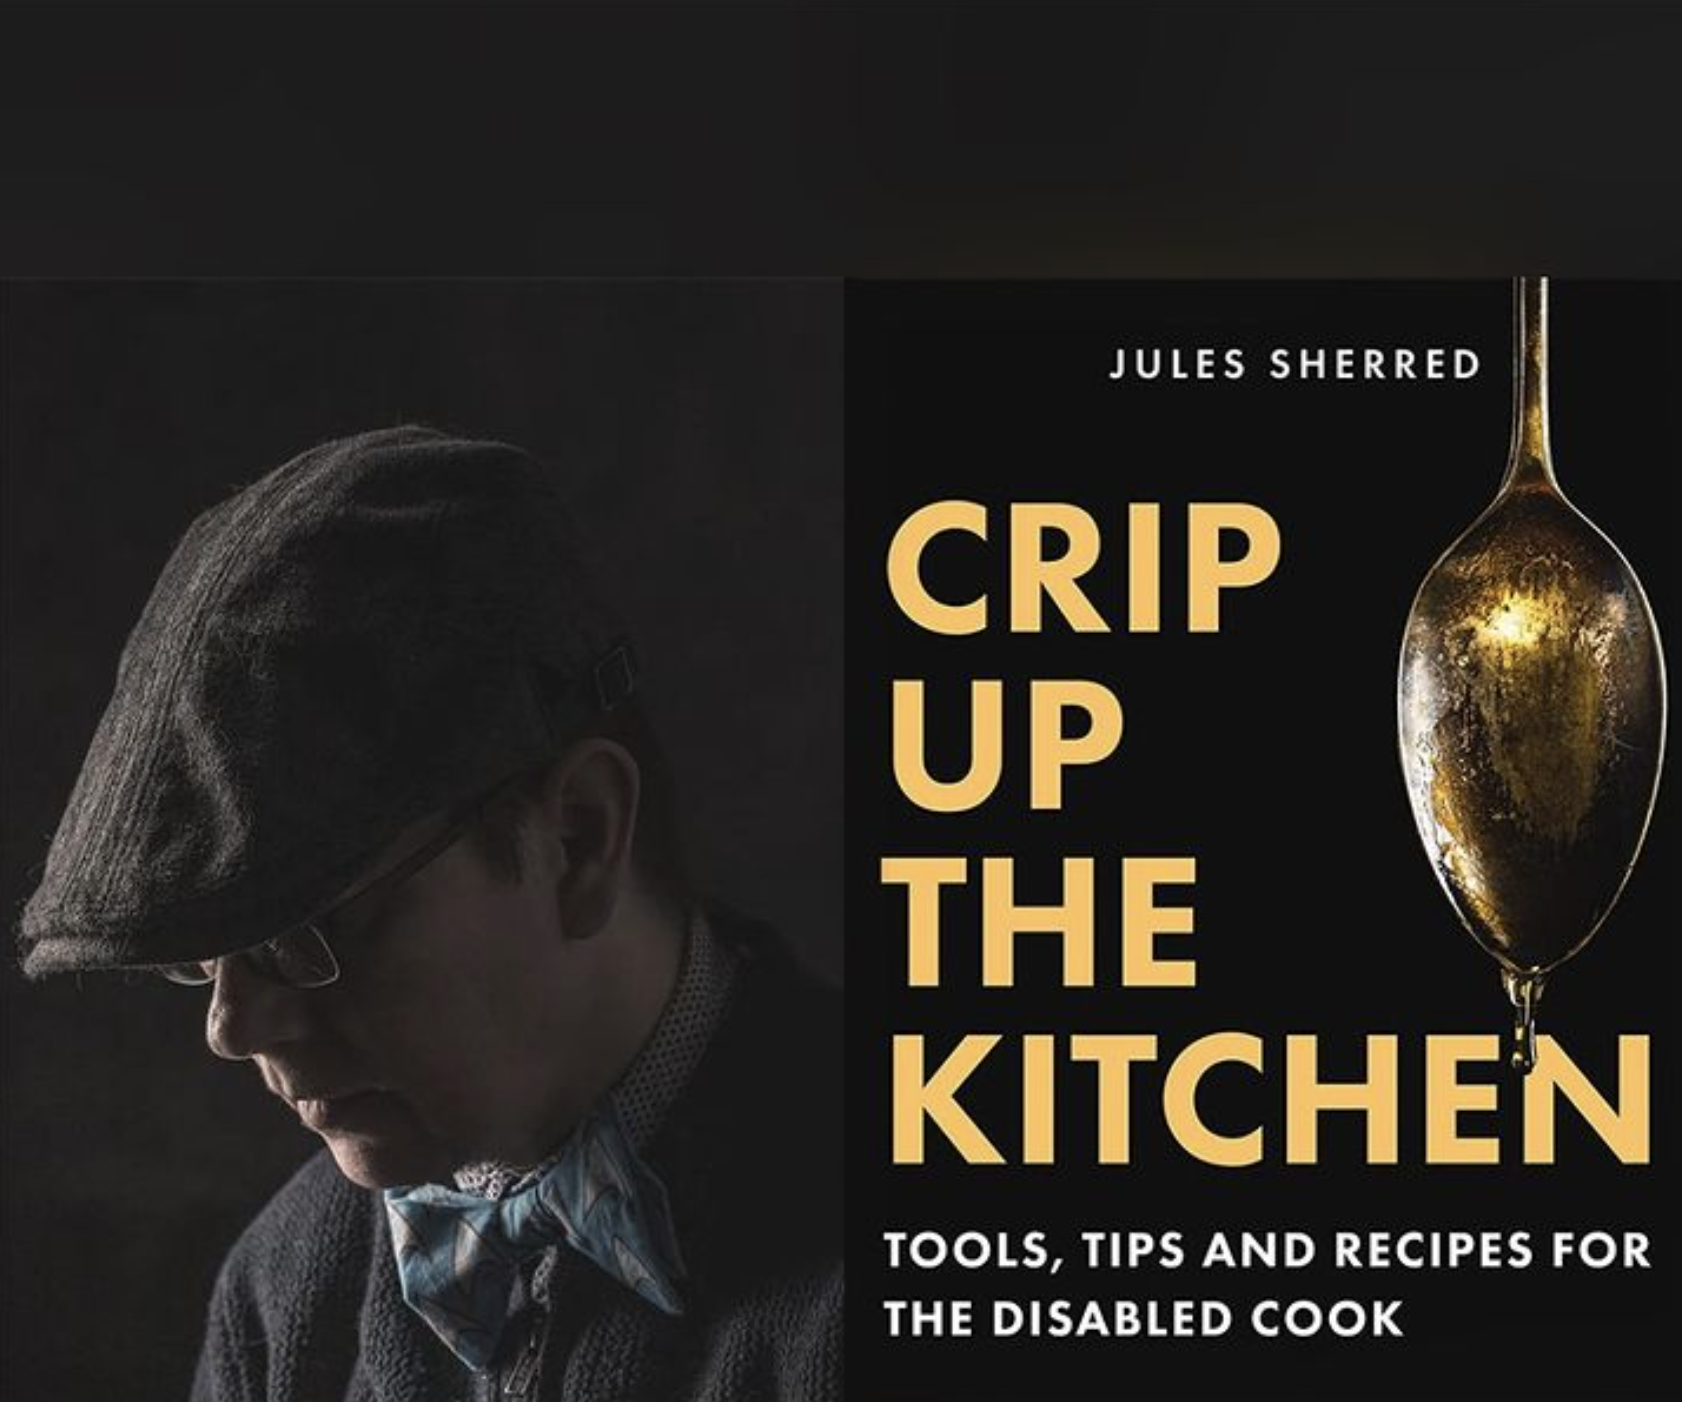 Book Cover for Jules Sherred's Crip Up the Kitchen cookbook.